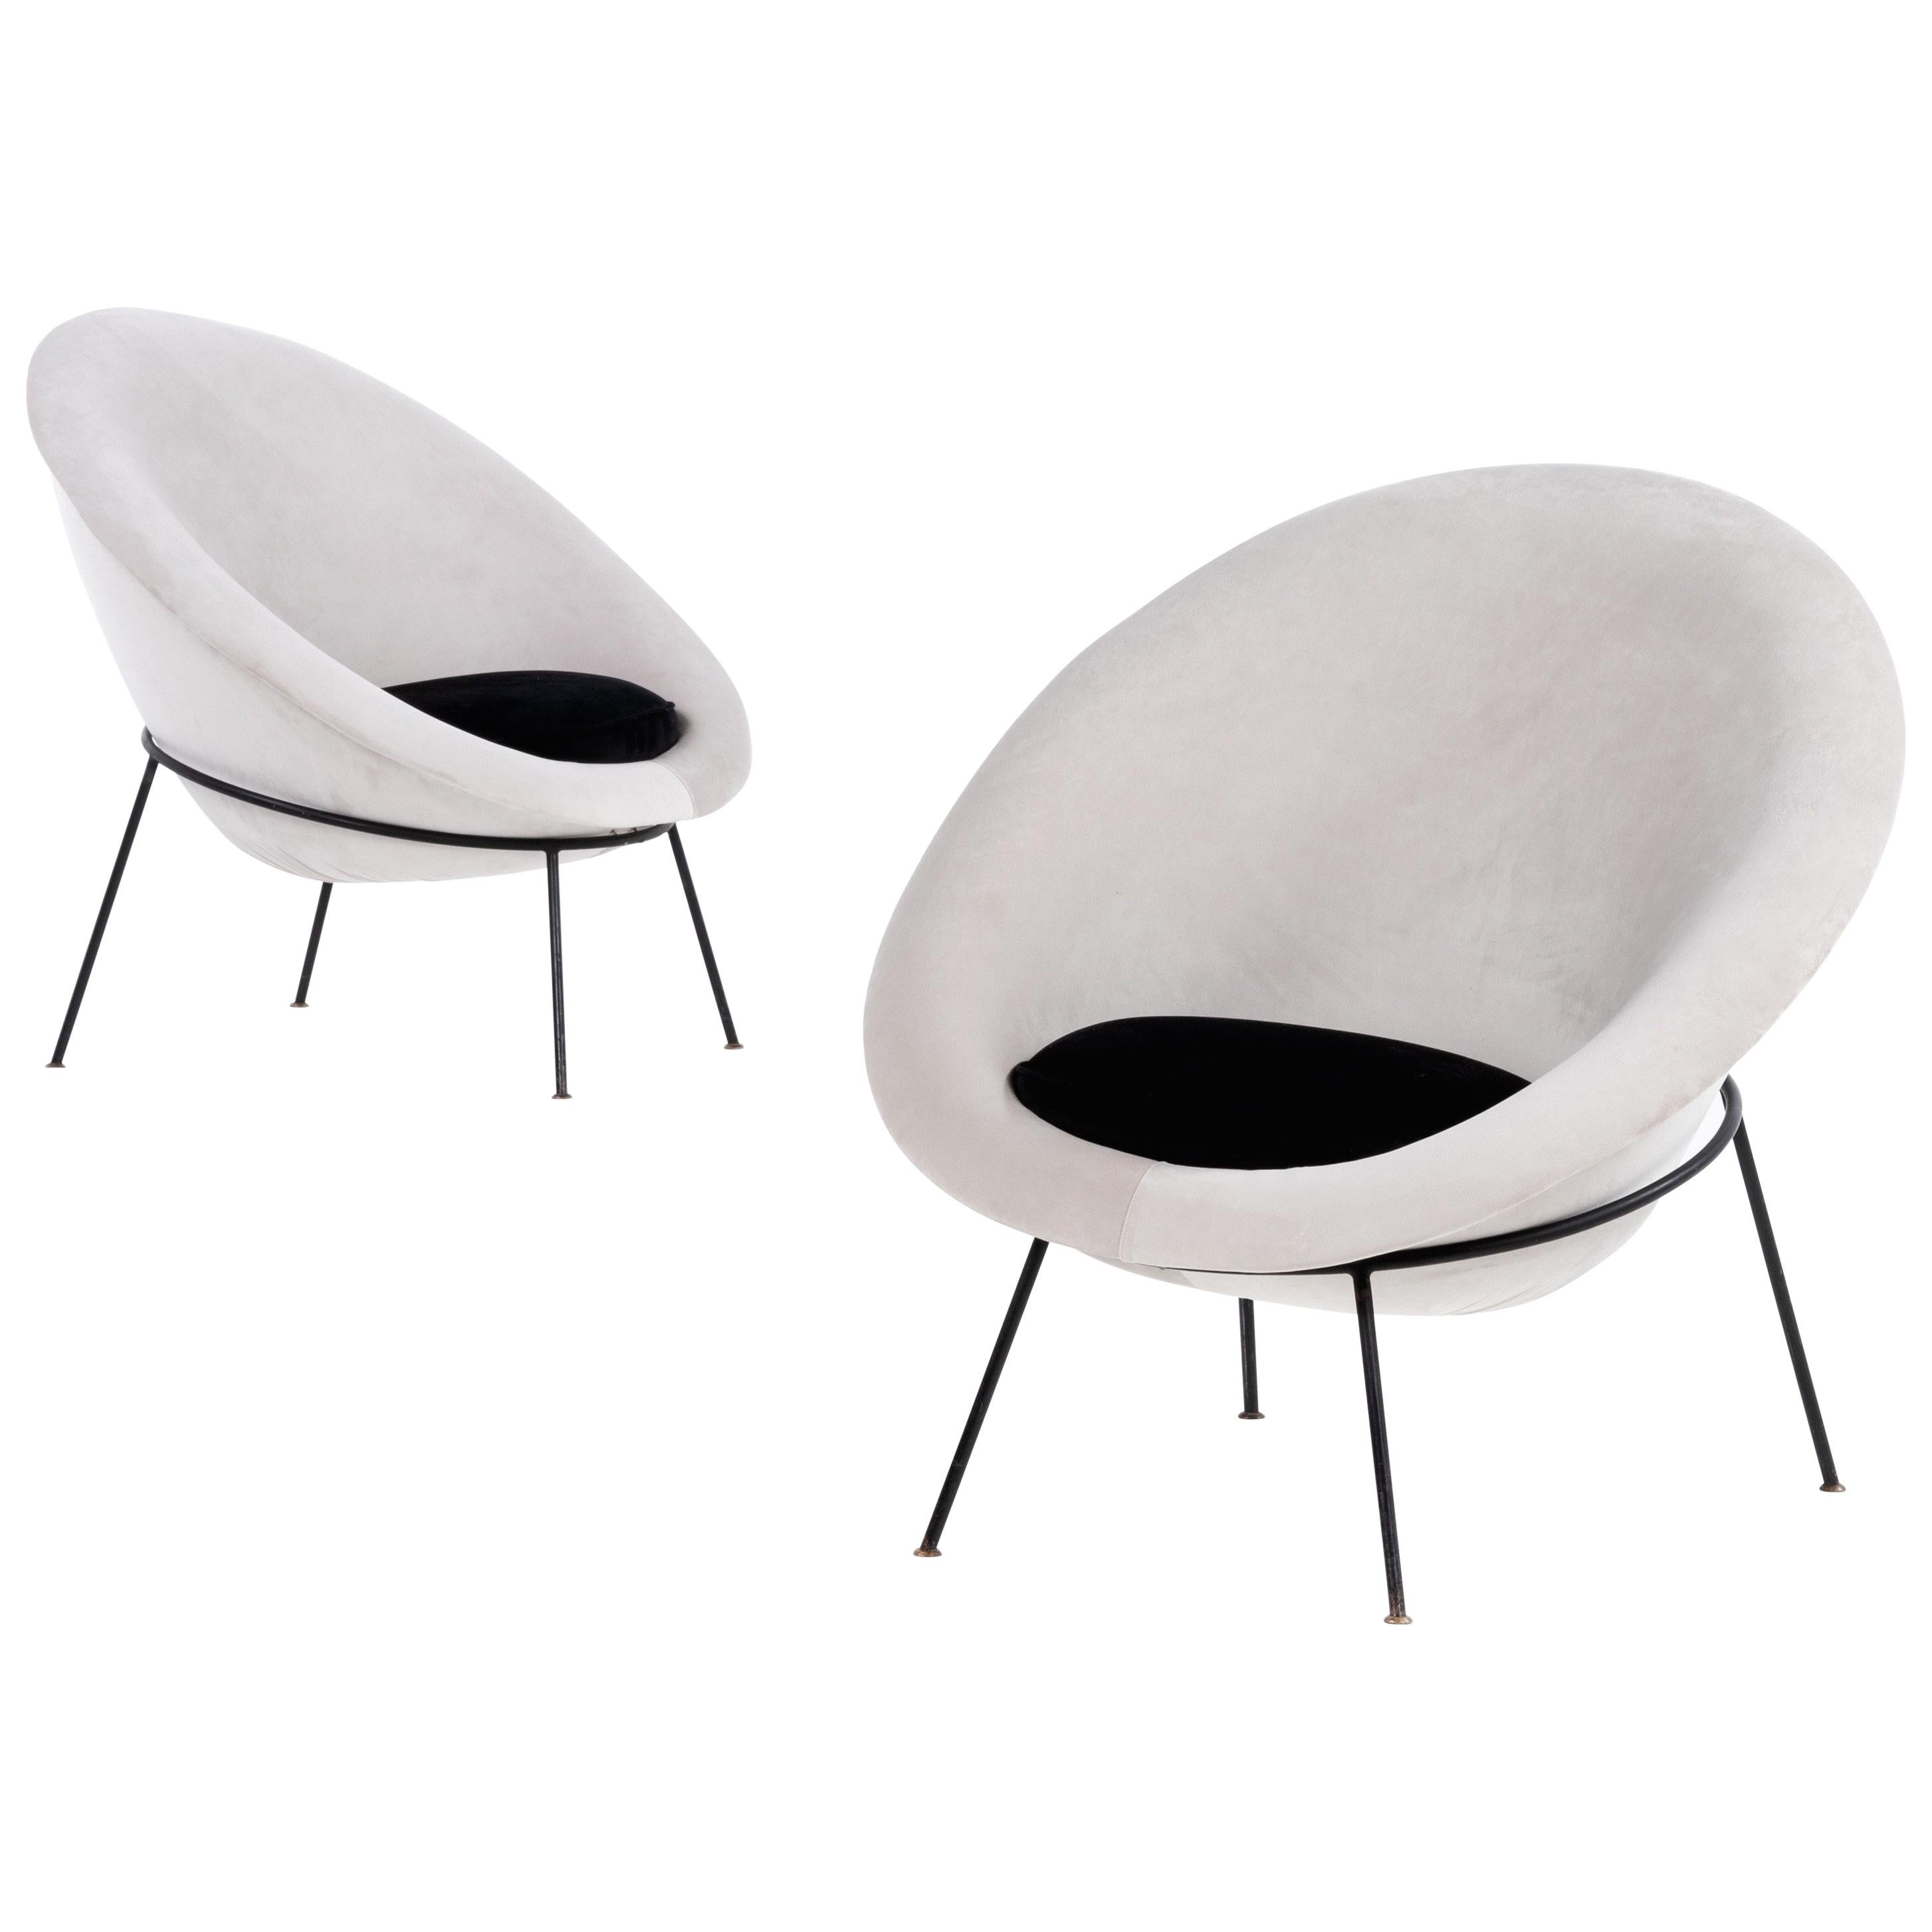 Pair of Egg Chairs by Ariberto Colombo in Velvet & Lacquered Metal, Italy 1950's